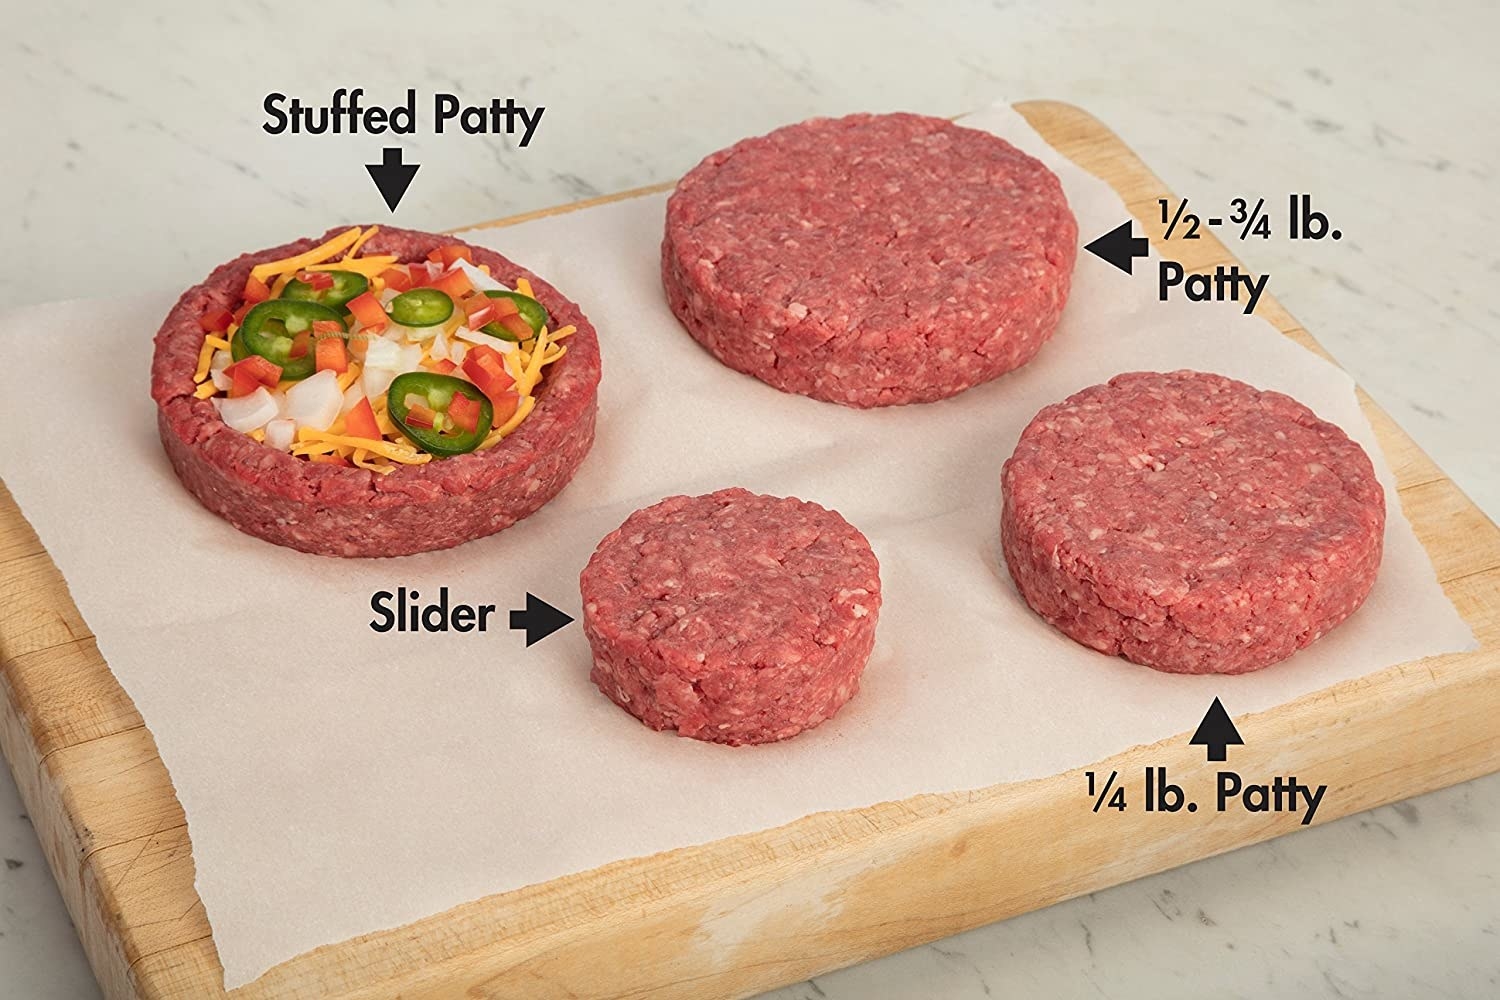 Patties showing the different sizes: stuffed patty, 1/2-3/4 lb. patty, 1/4 lb patty and slider